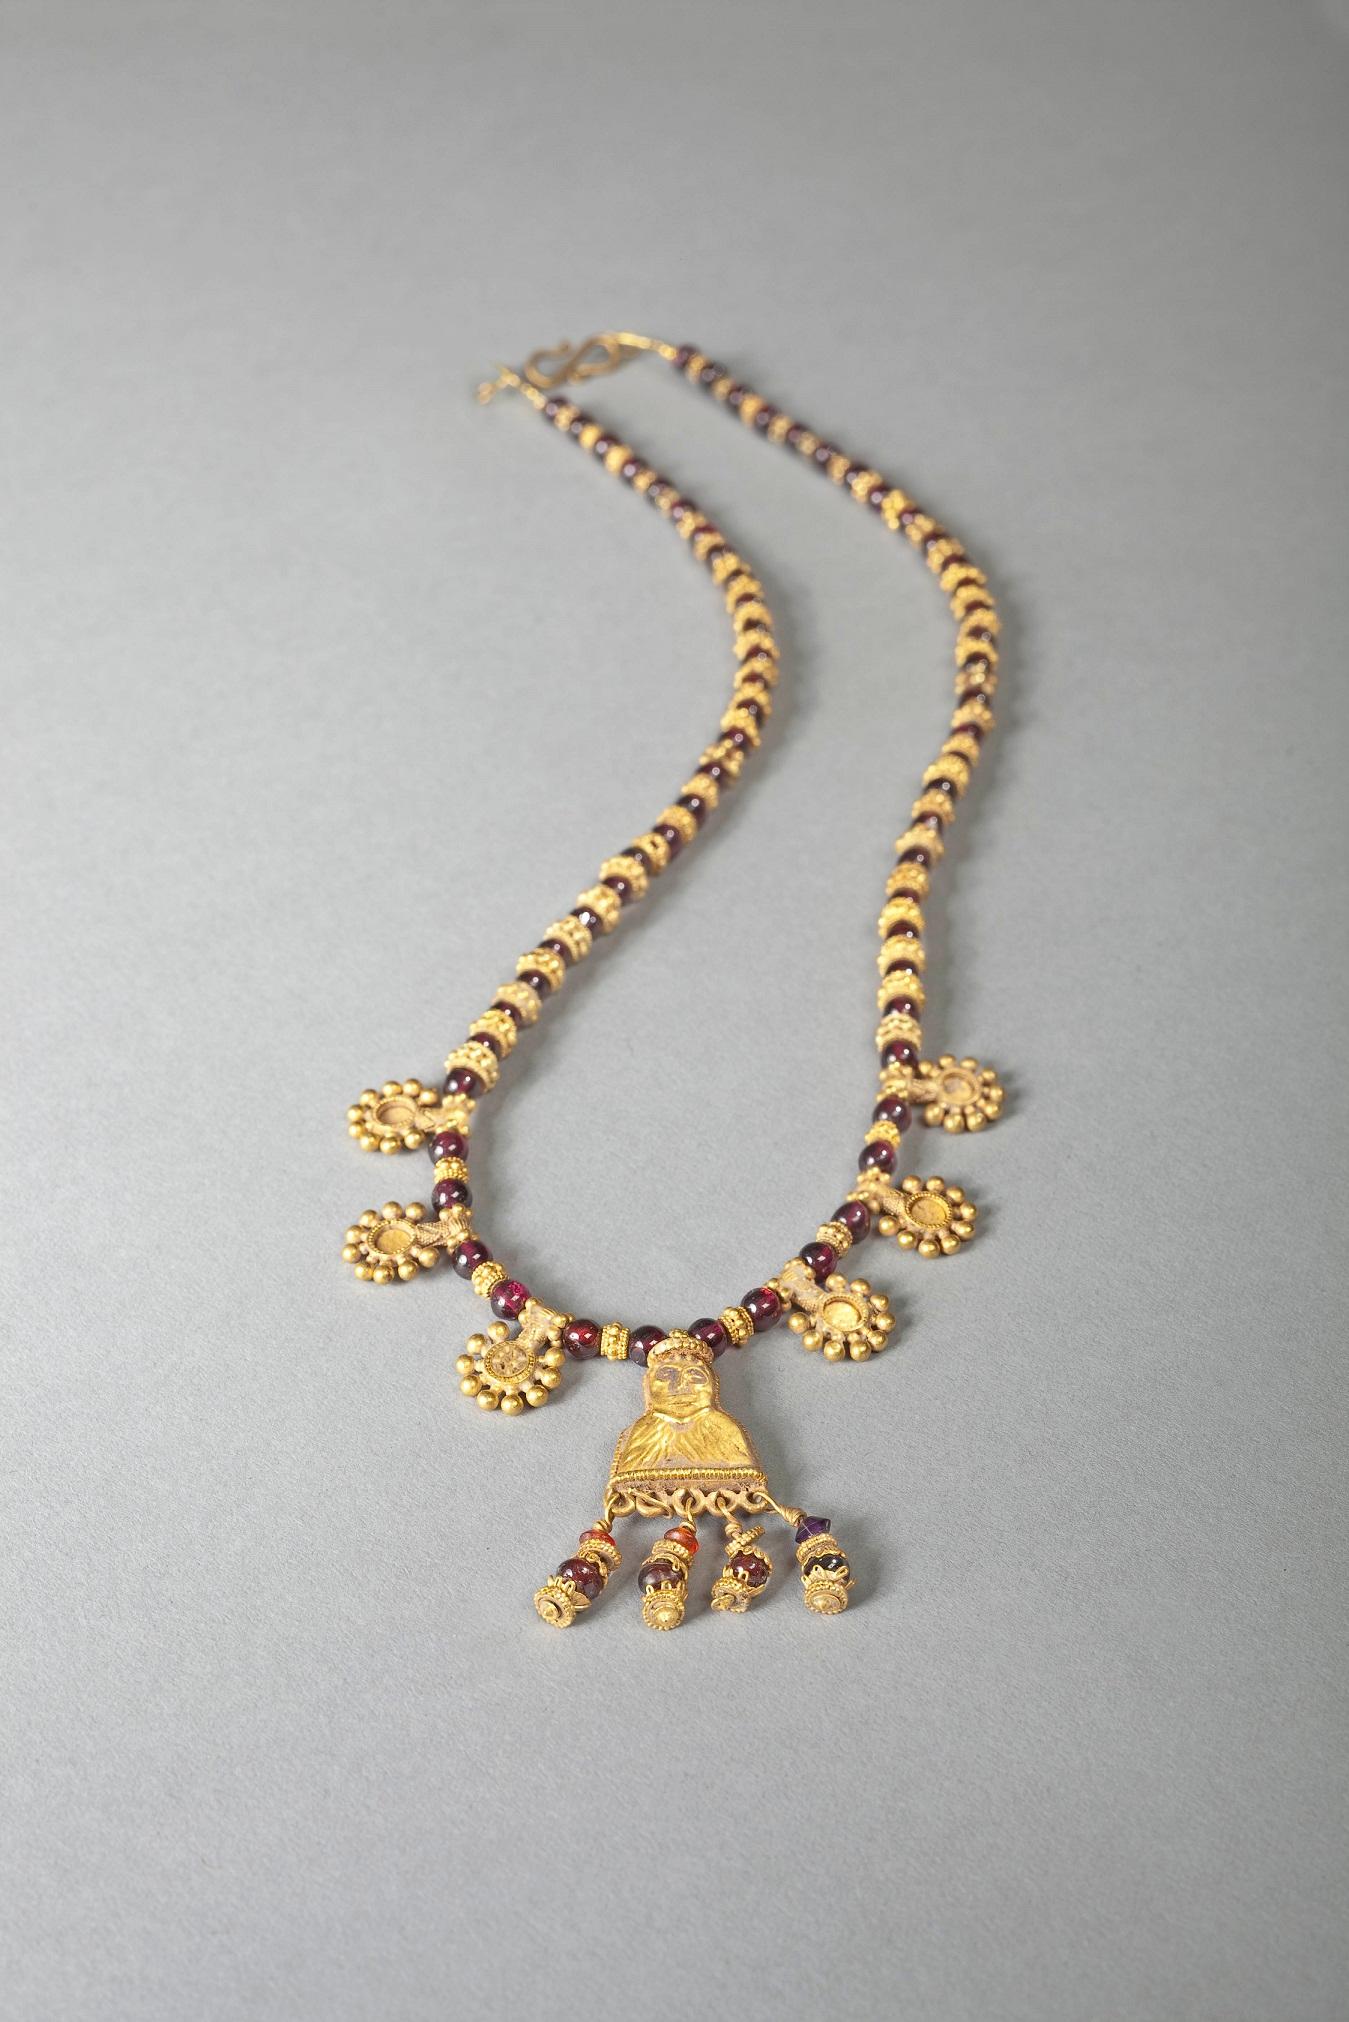 Bead Ancient Necklace with Figurative Pendant For Sale